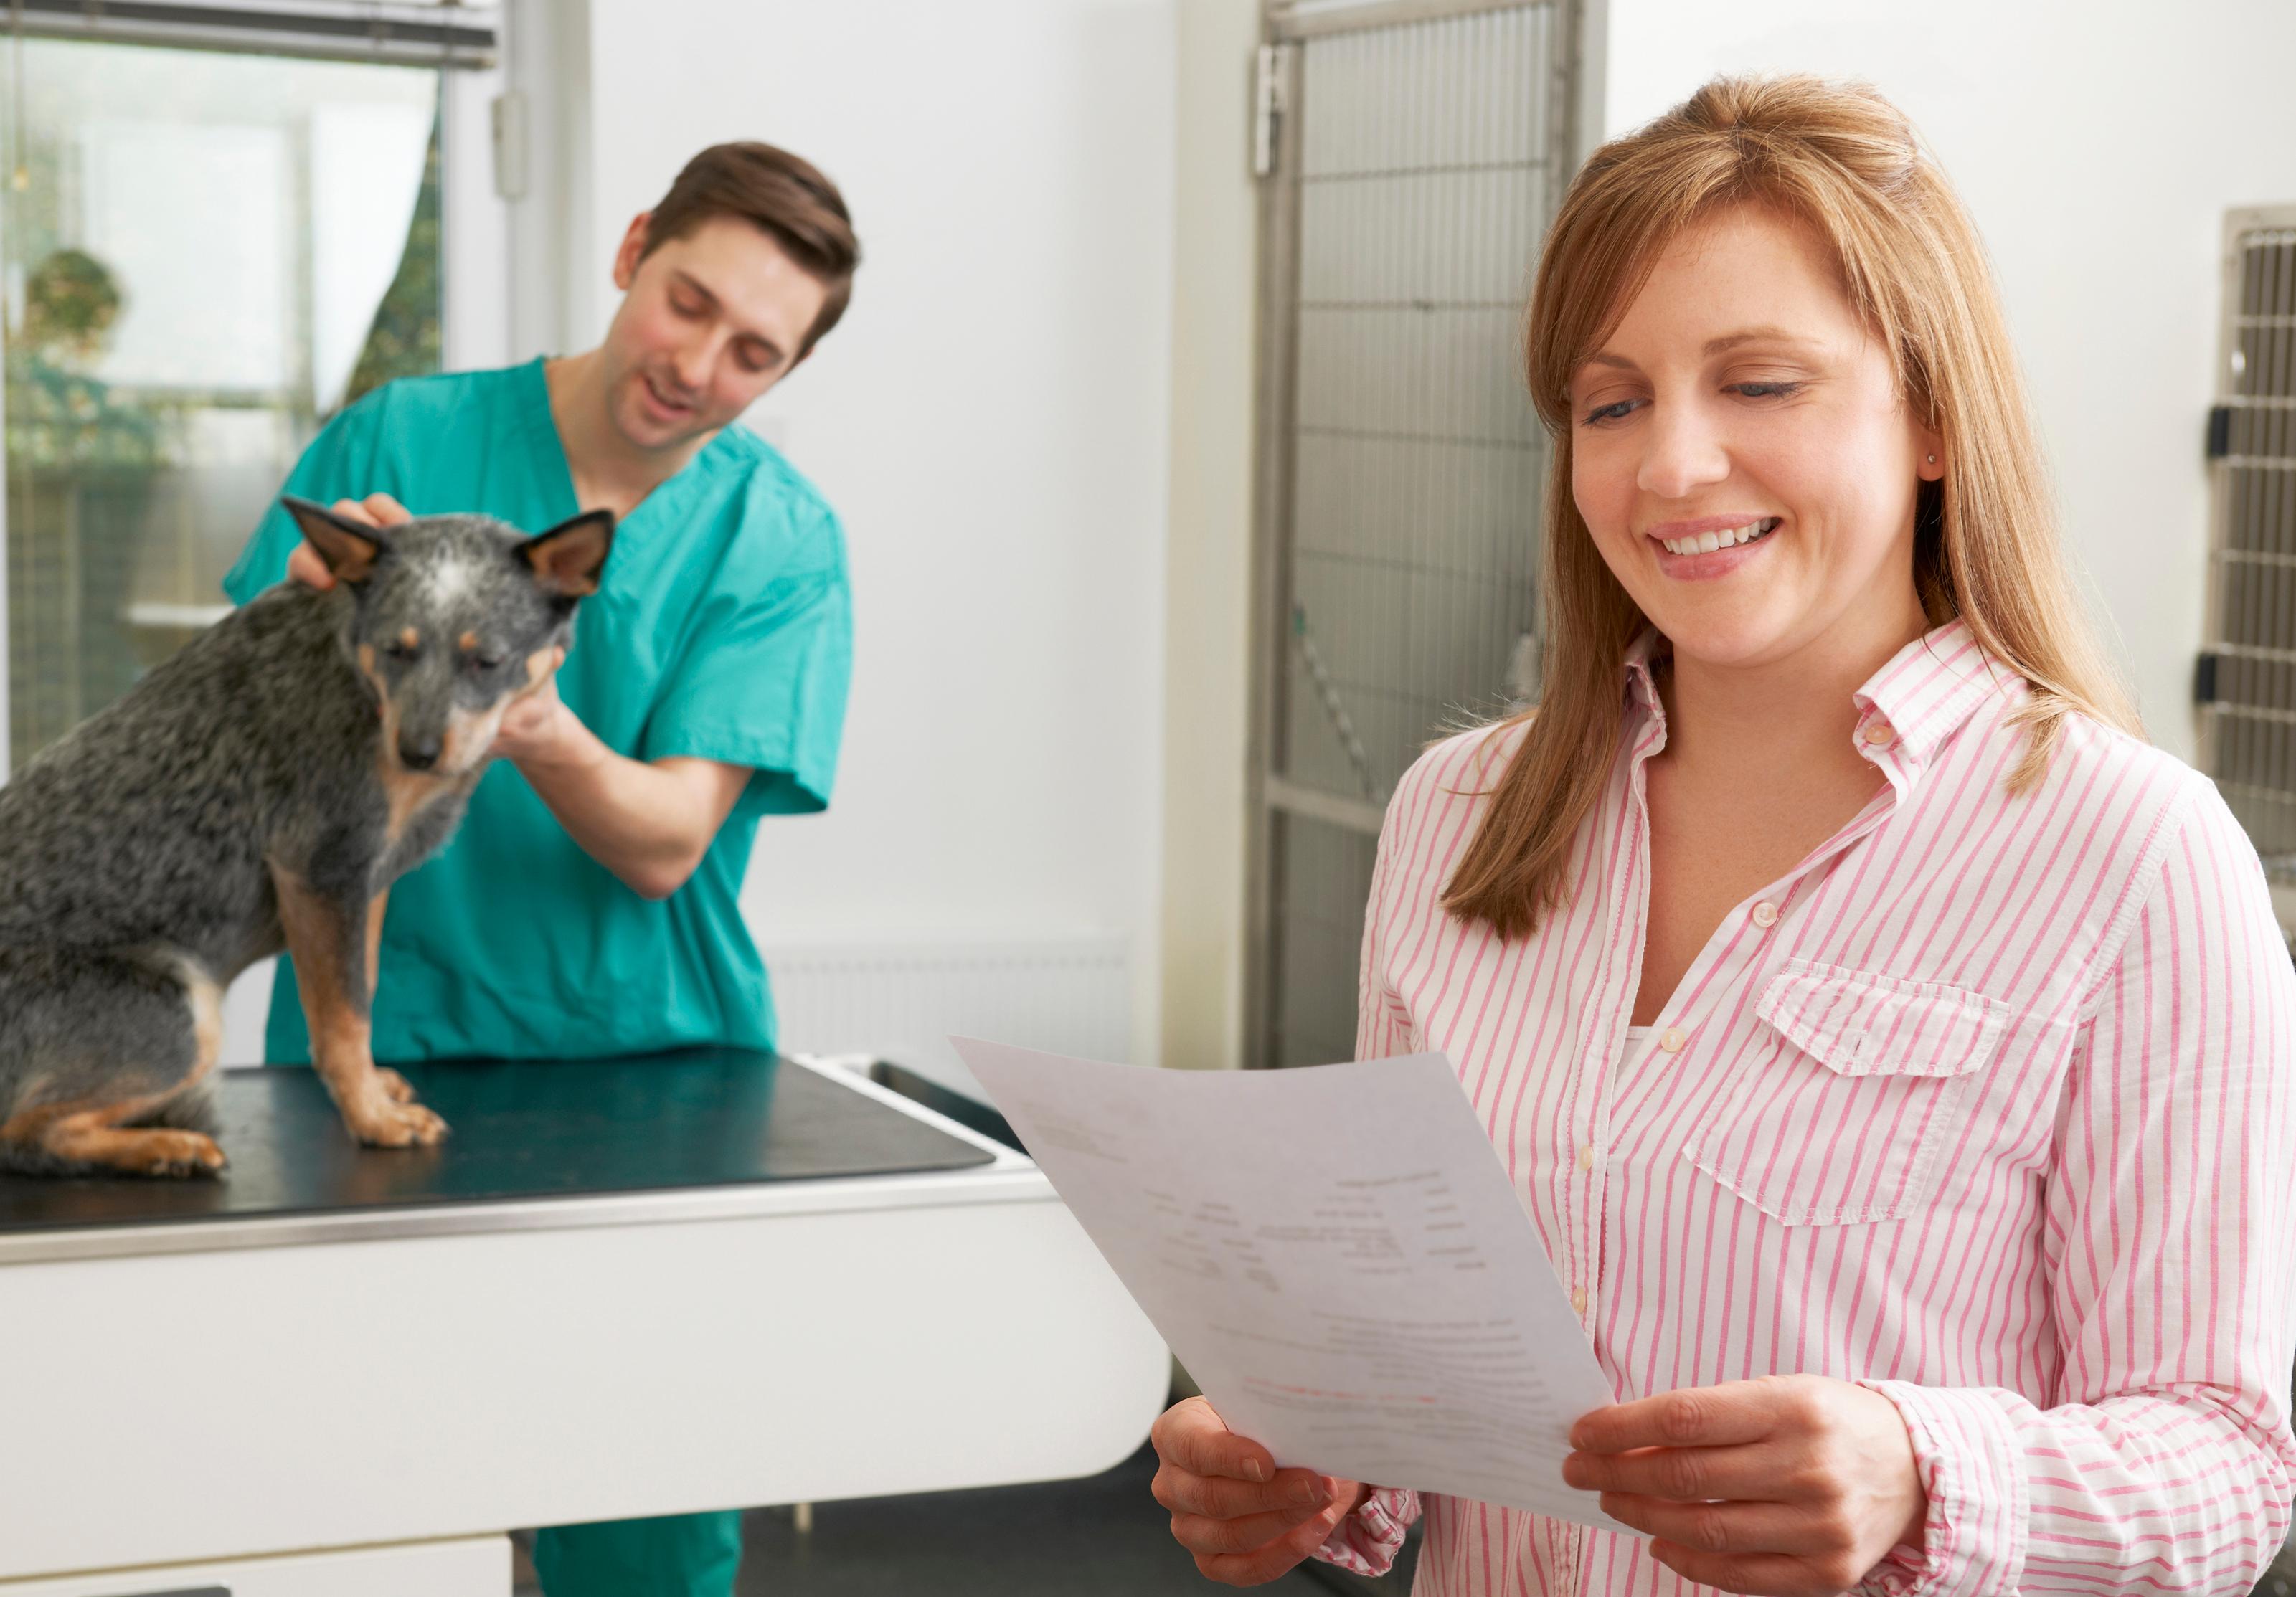 A woman is viewing her bill while a vet doctor is treating her dog in the background.